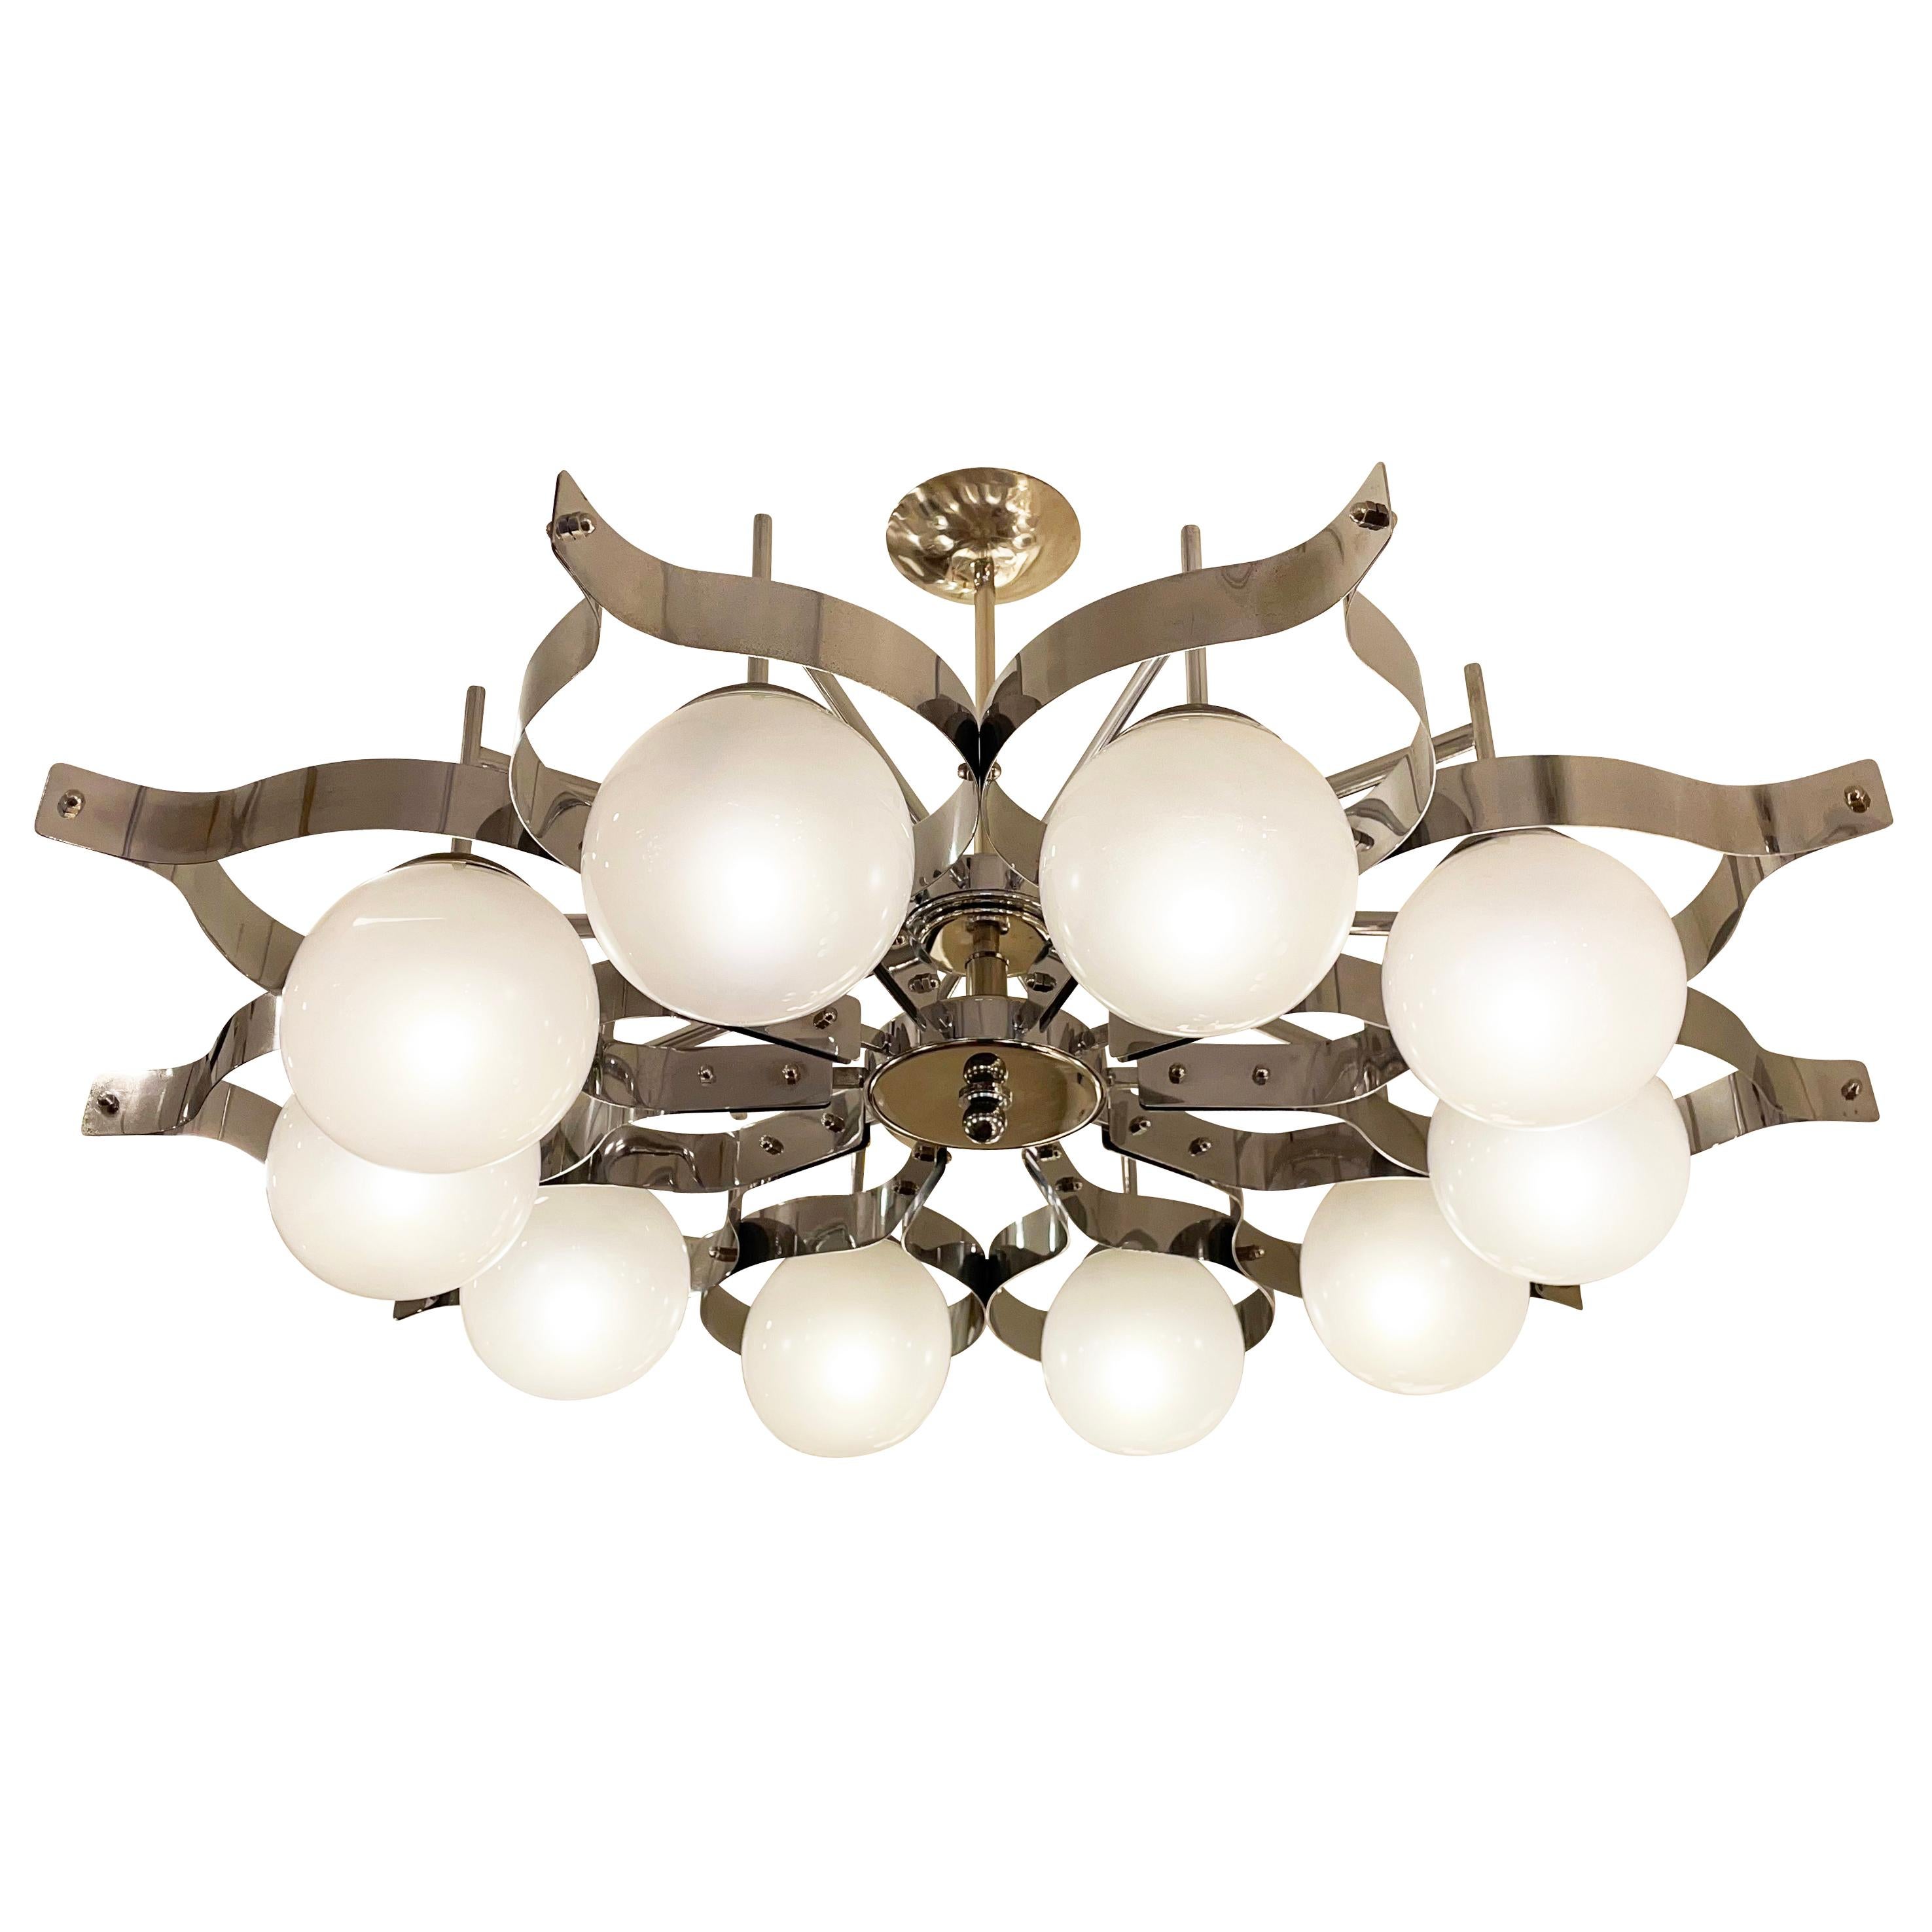 Italian Mid-Century chandelier in the manner of the “Pavone” designed by Gio Ponti for Arredoluce. The intricate frame is in polished nickel and holds ten pearlized glass shades.

Condition: Good vintage condition, minor wear consistent with age